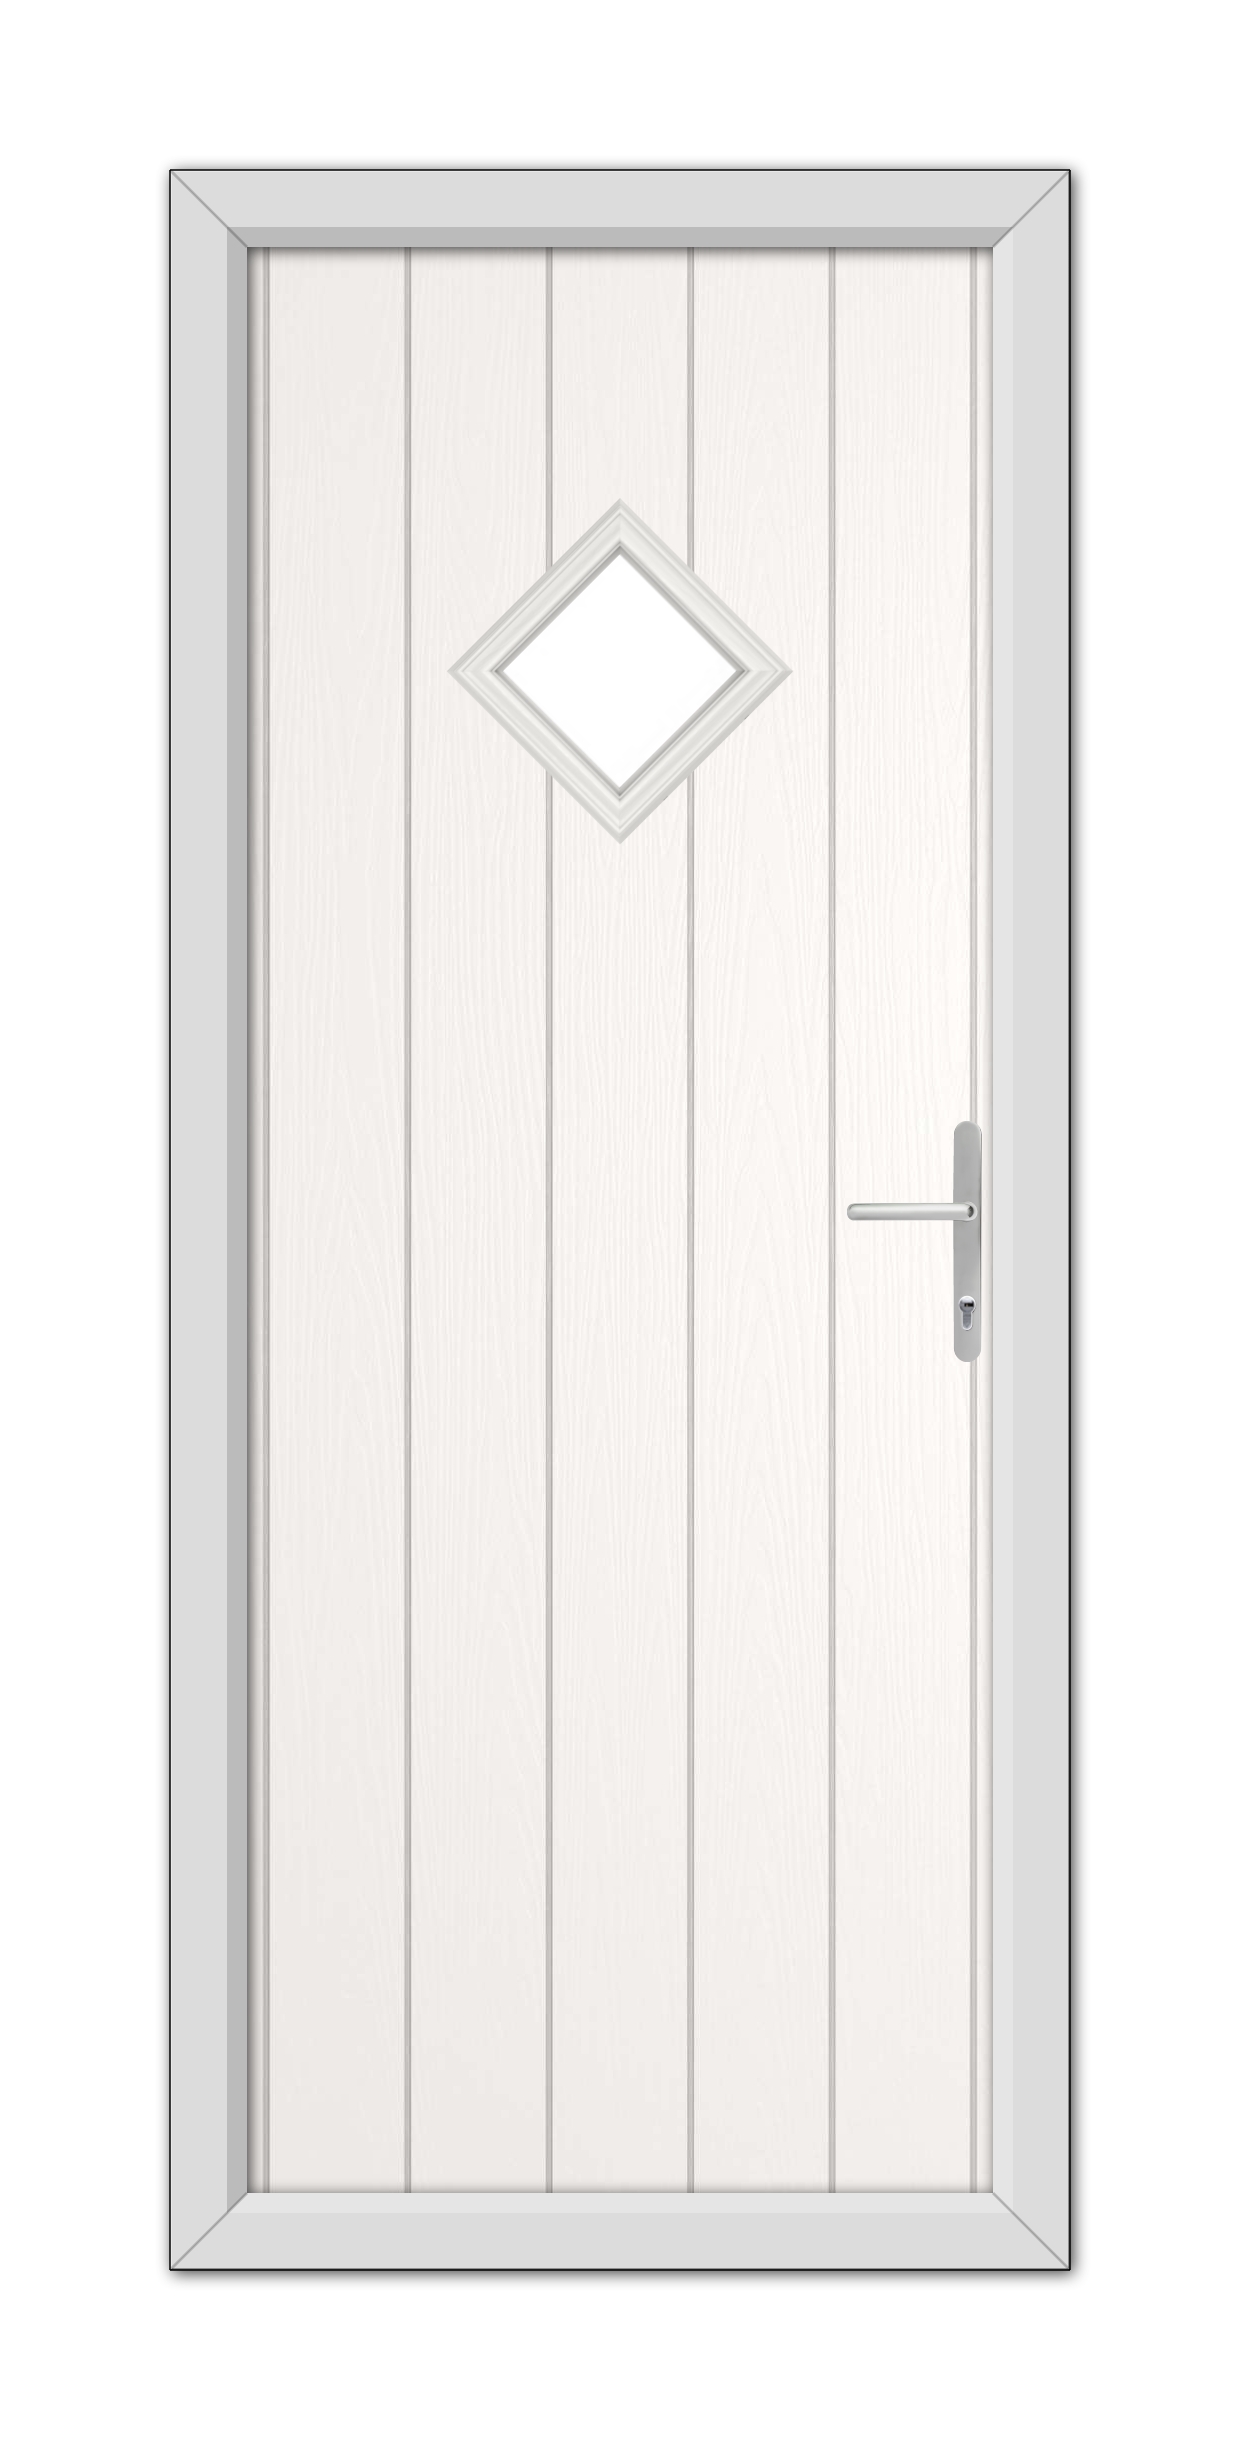 A White Cornwall Composite Door 48mm Timber Core with a diamond-shaped window at the top and a modern handle, set within a simple frame.